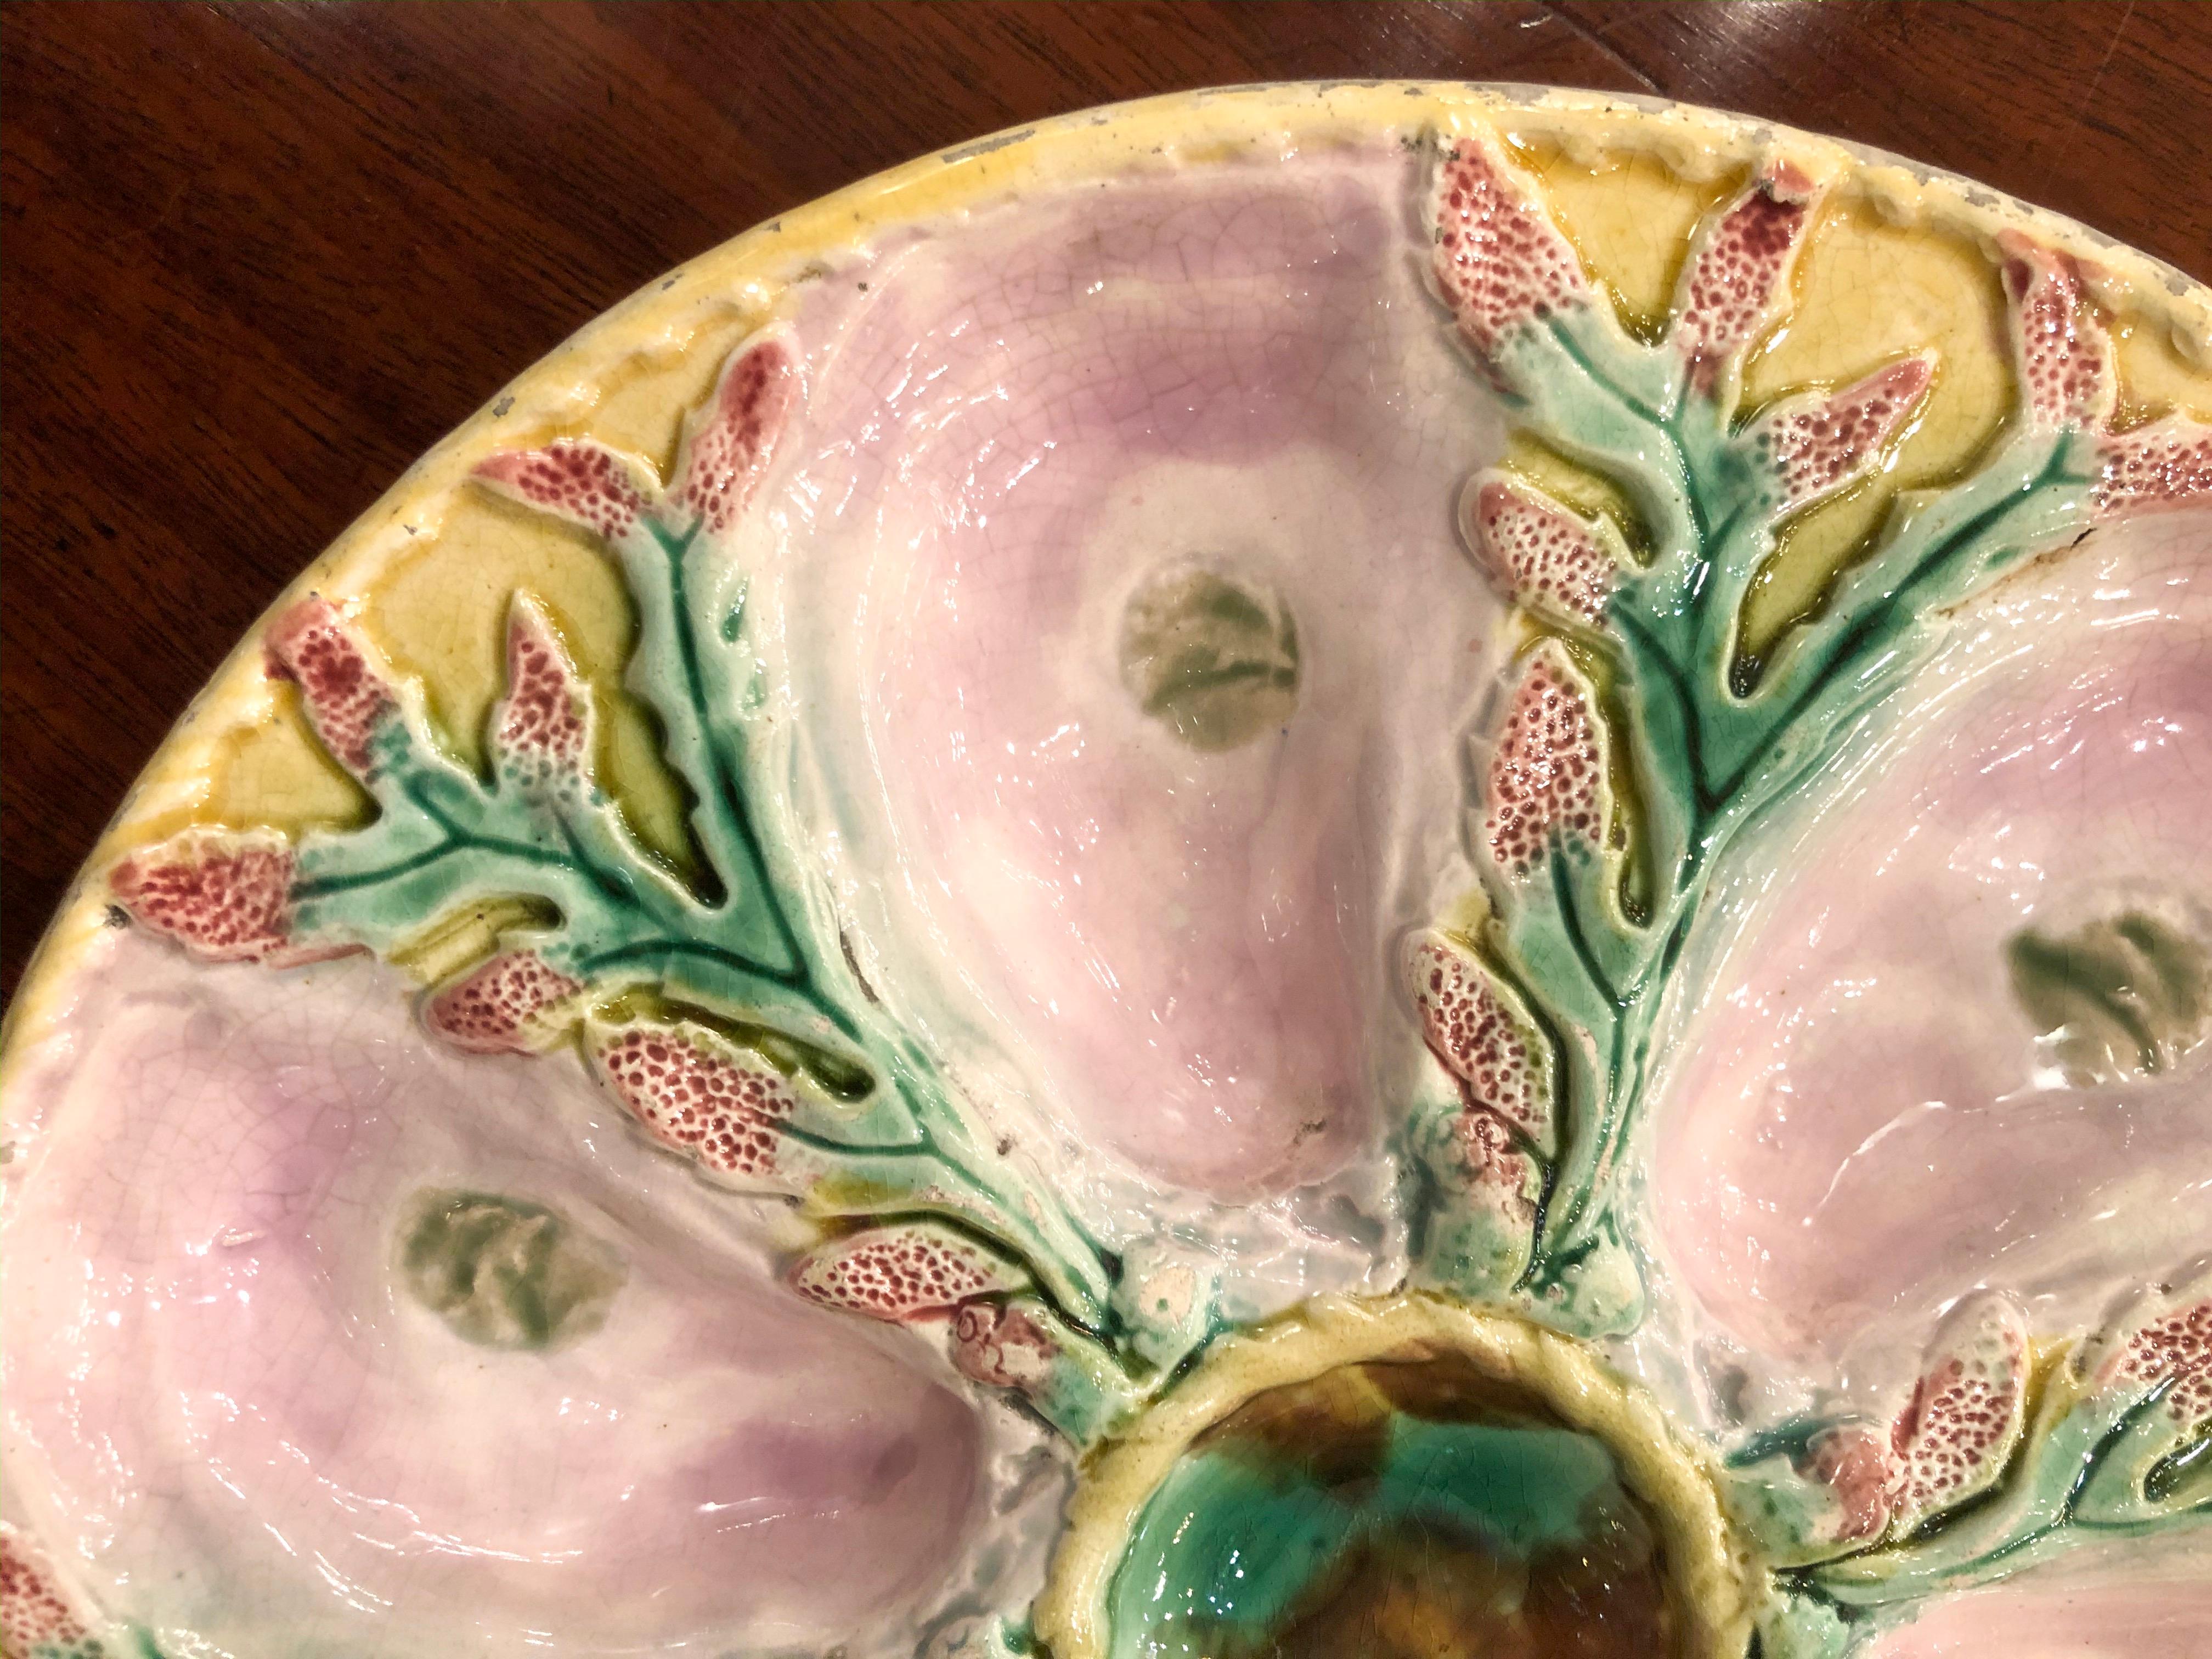 Antique English Majolica oyster plate by S. Fielding, circa 1880.